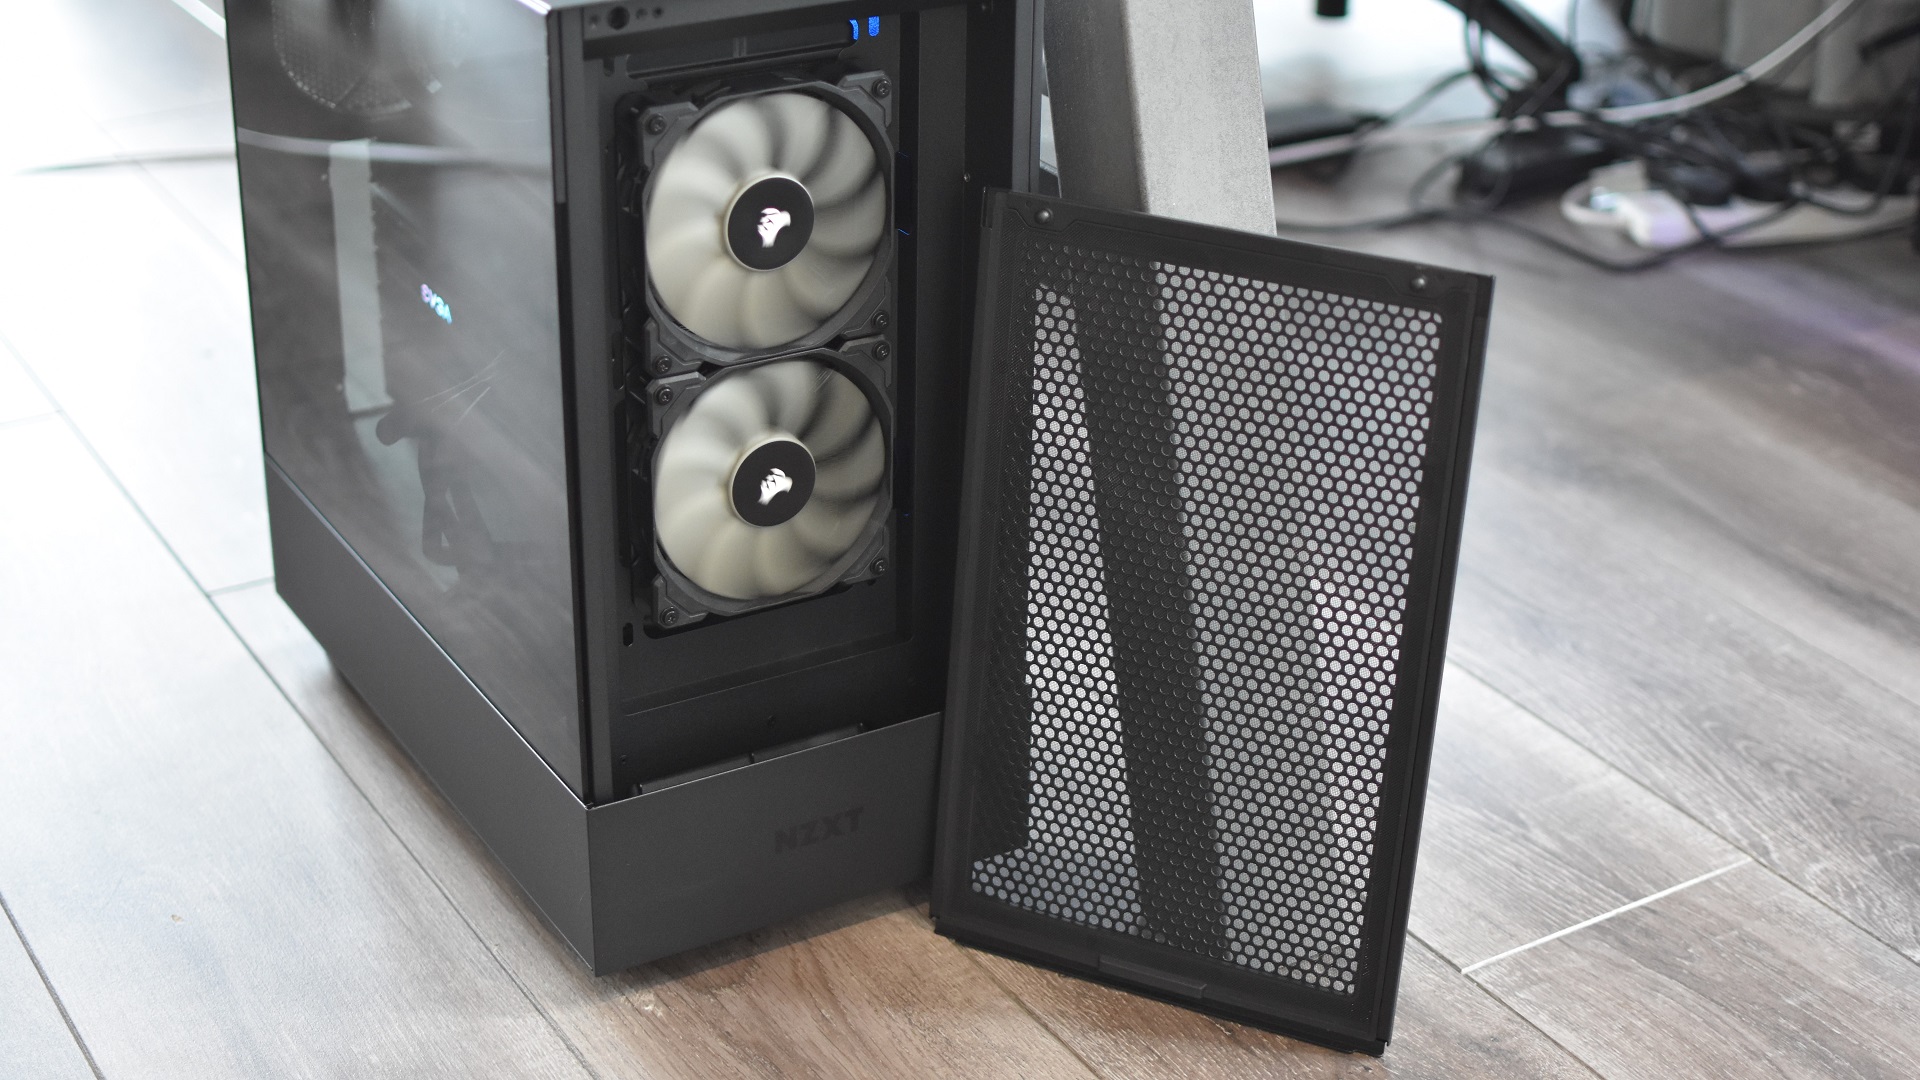 The front dust filter on the NZXT H5 Flow case, propped up against the case itself.